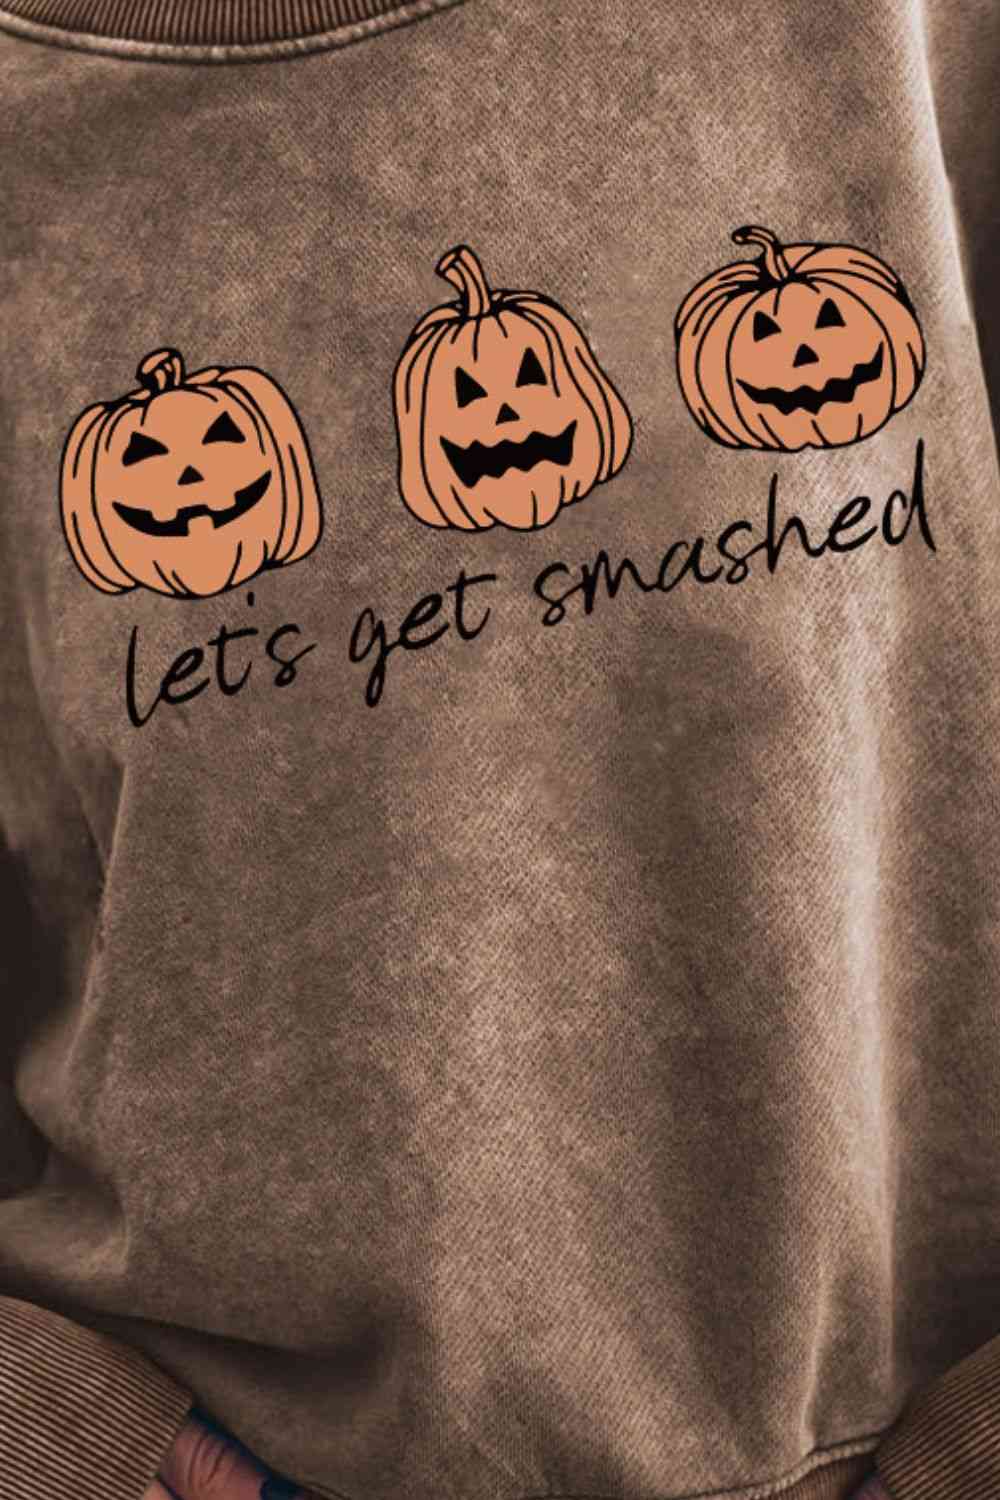 LET'S GET SMASHED Graphic Sweatshirt BLUE ZONE PLANET